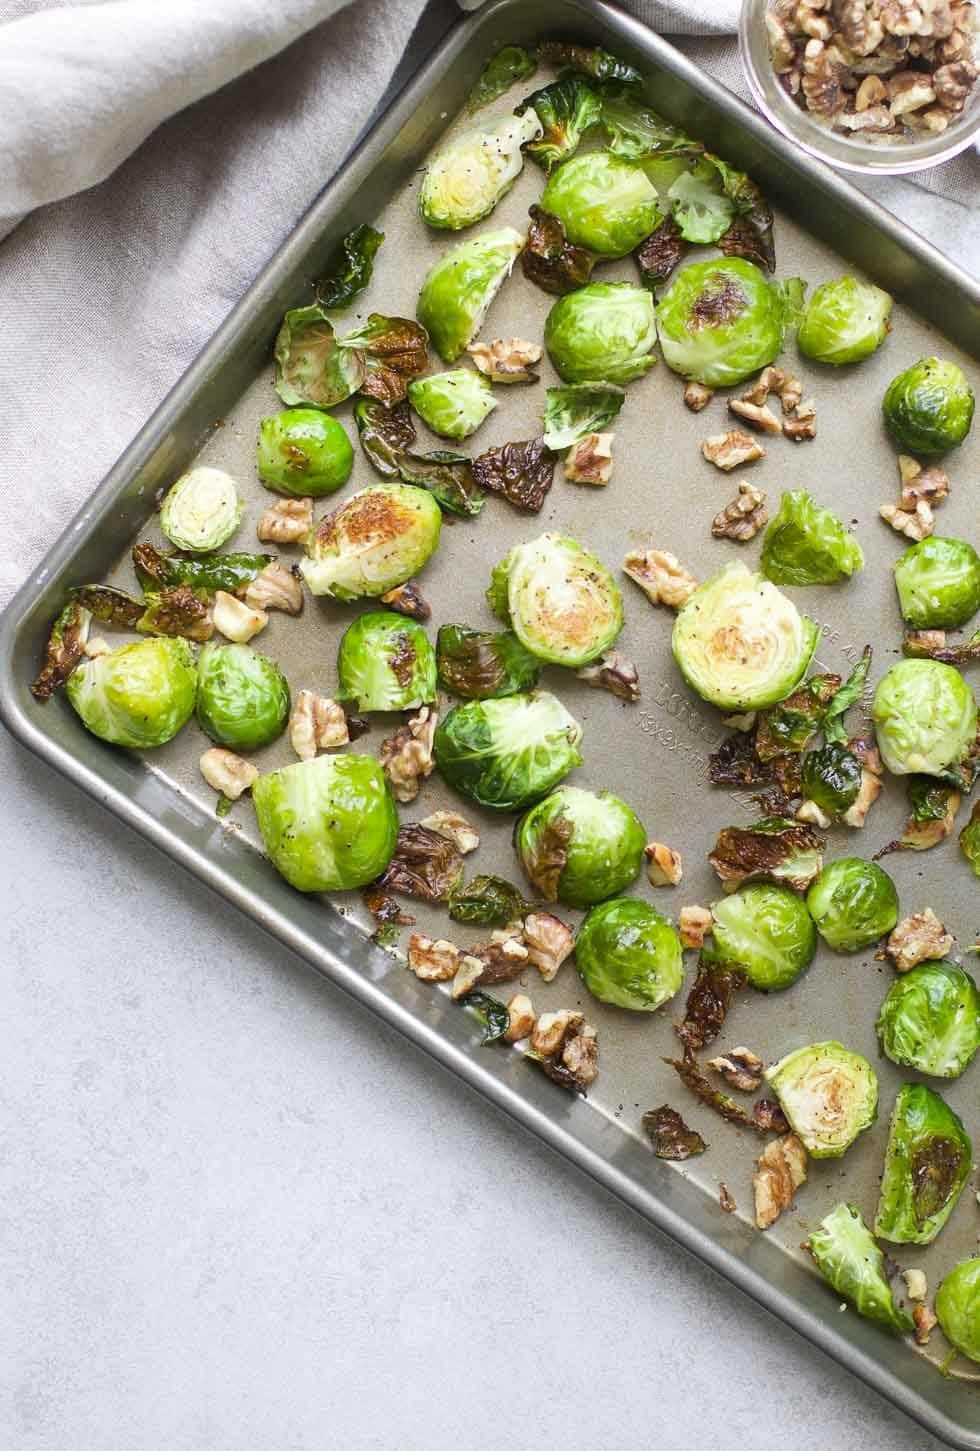 Balsamic Roasted Brussels Sprouts with Toasted Walnuts